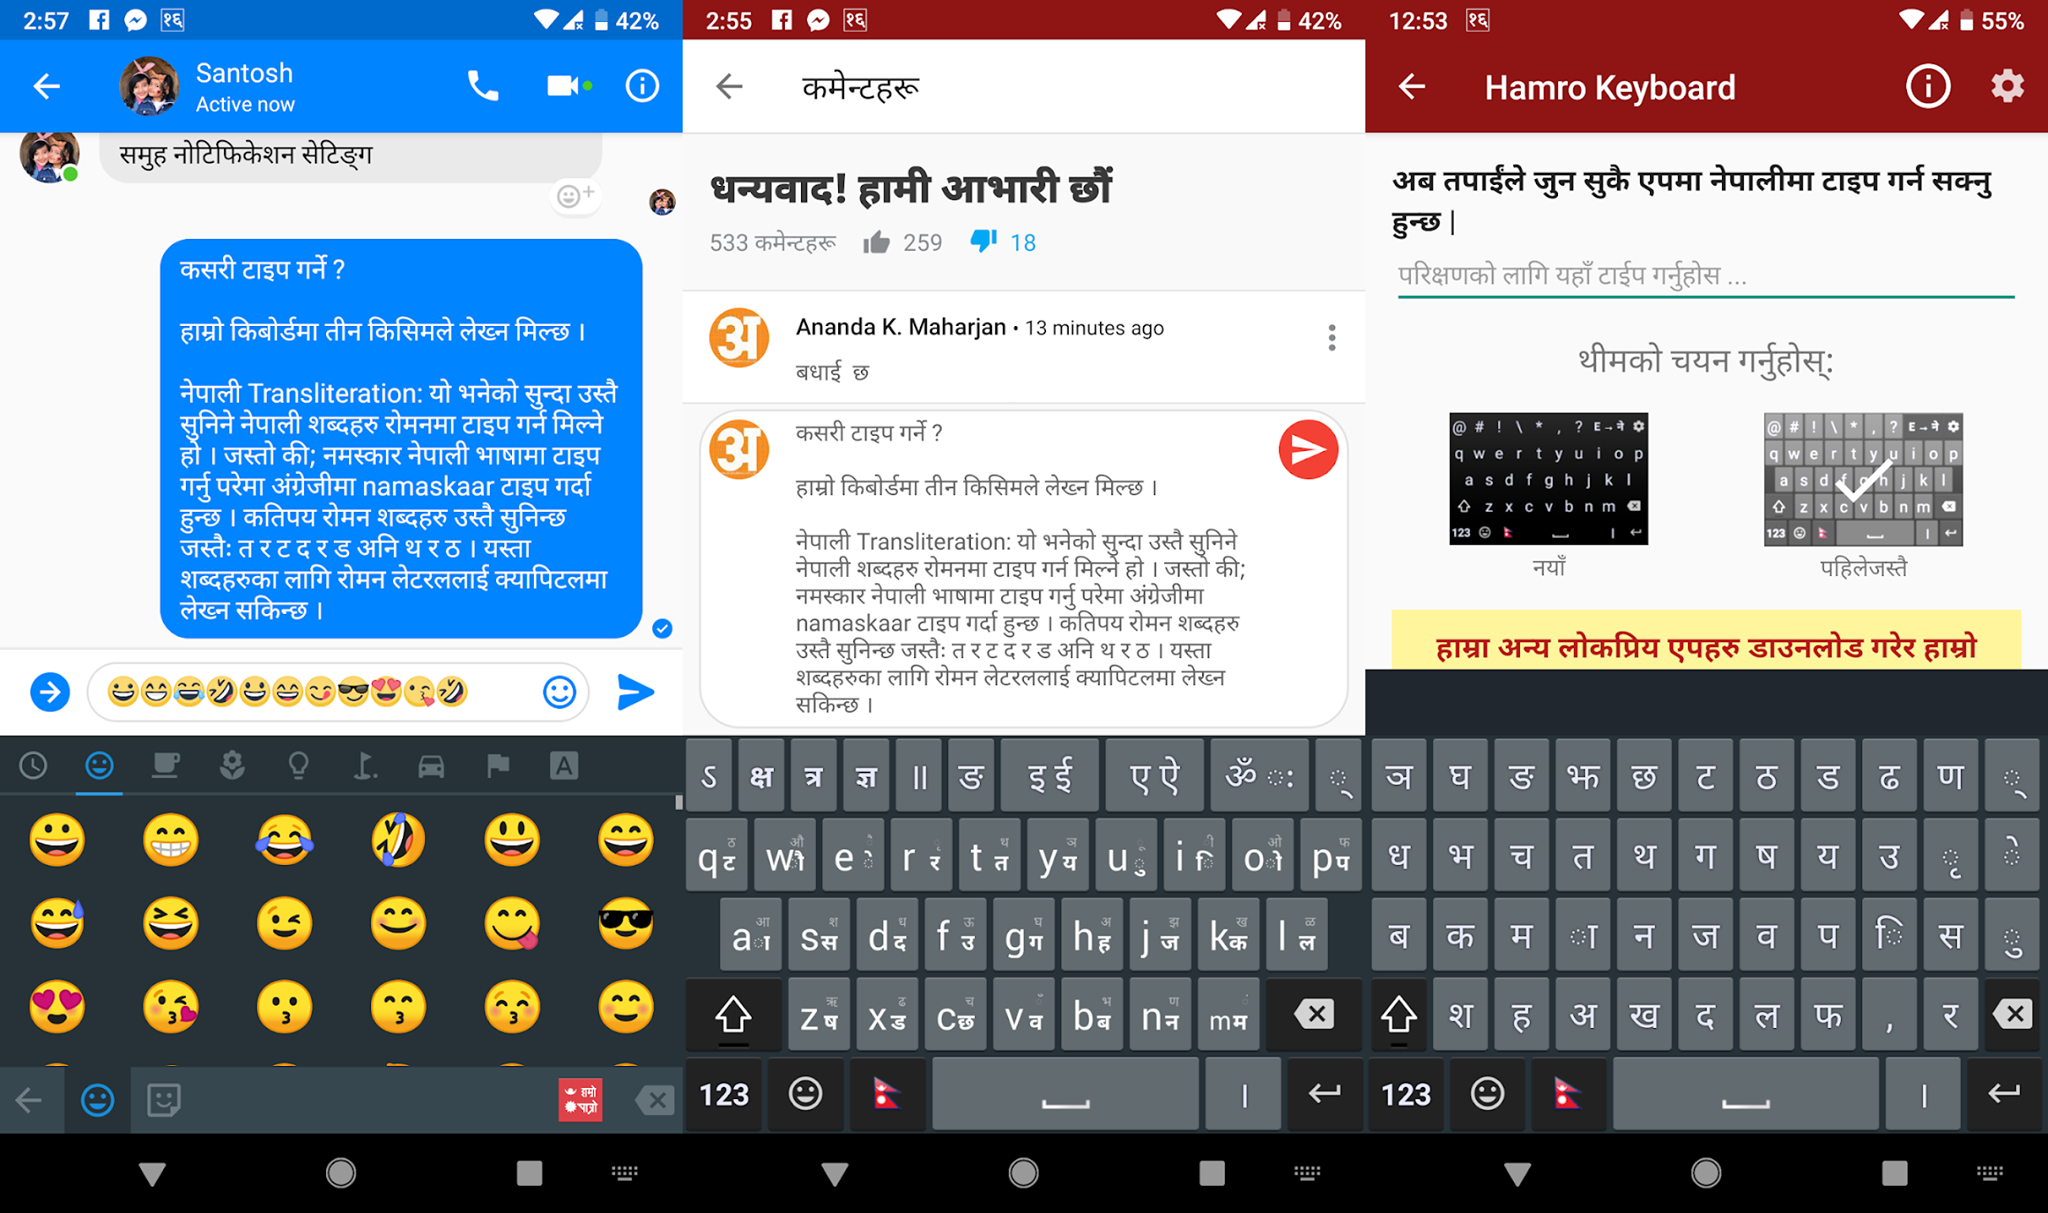 Hamro Keyboard clarifies it doesn’t collect sensitive, private info